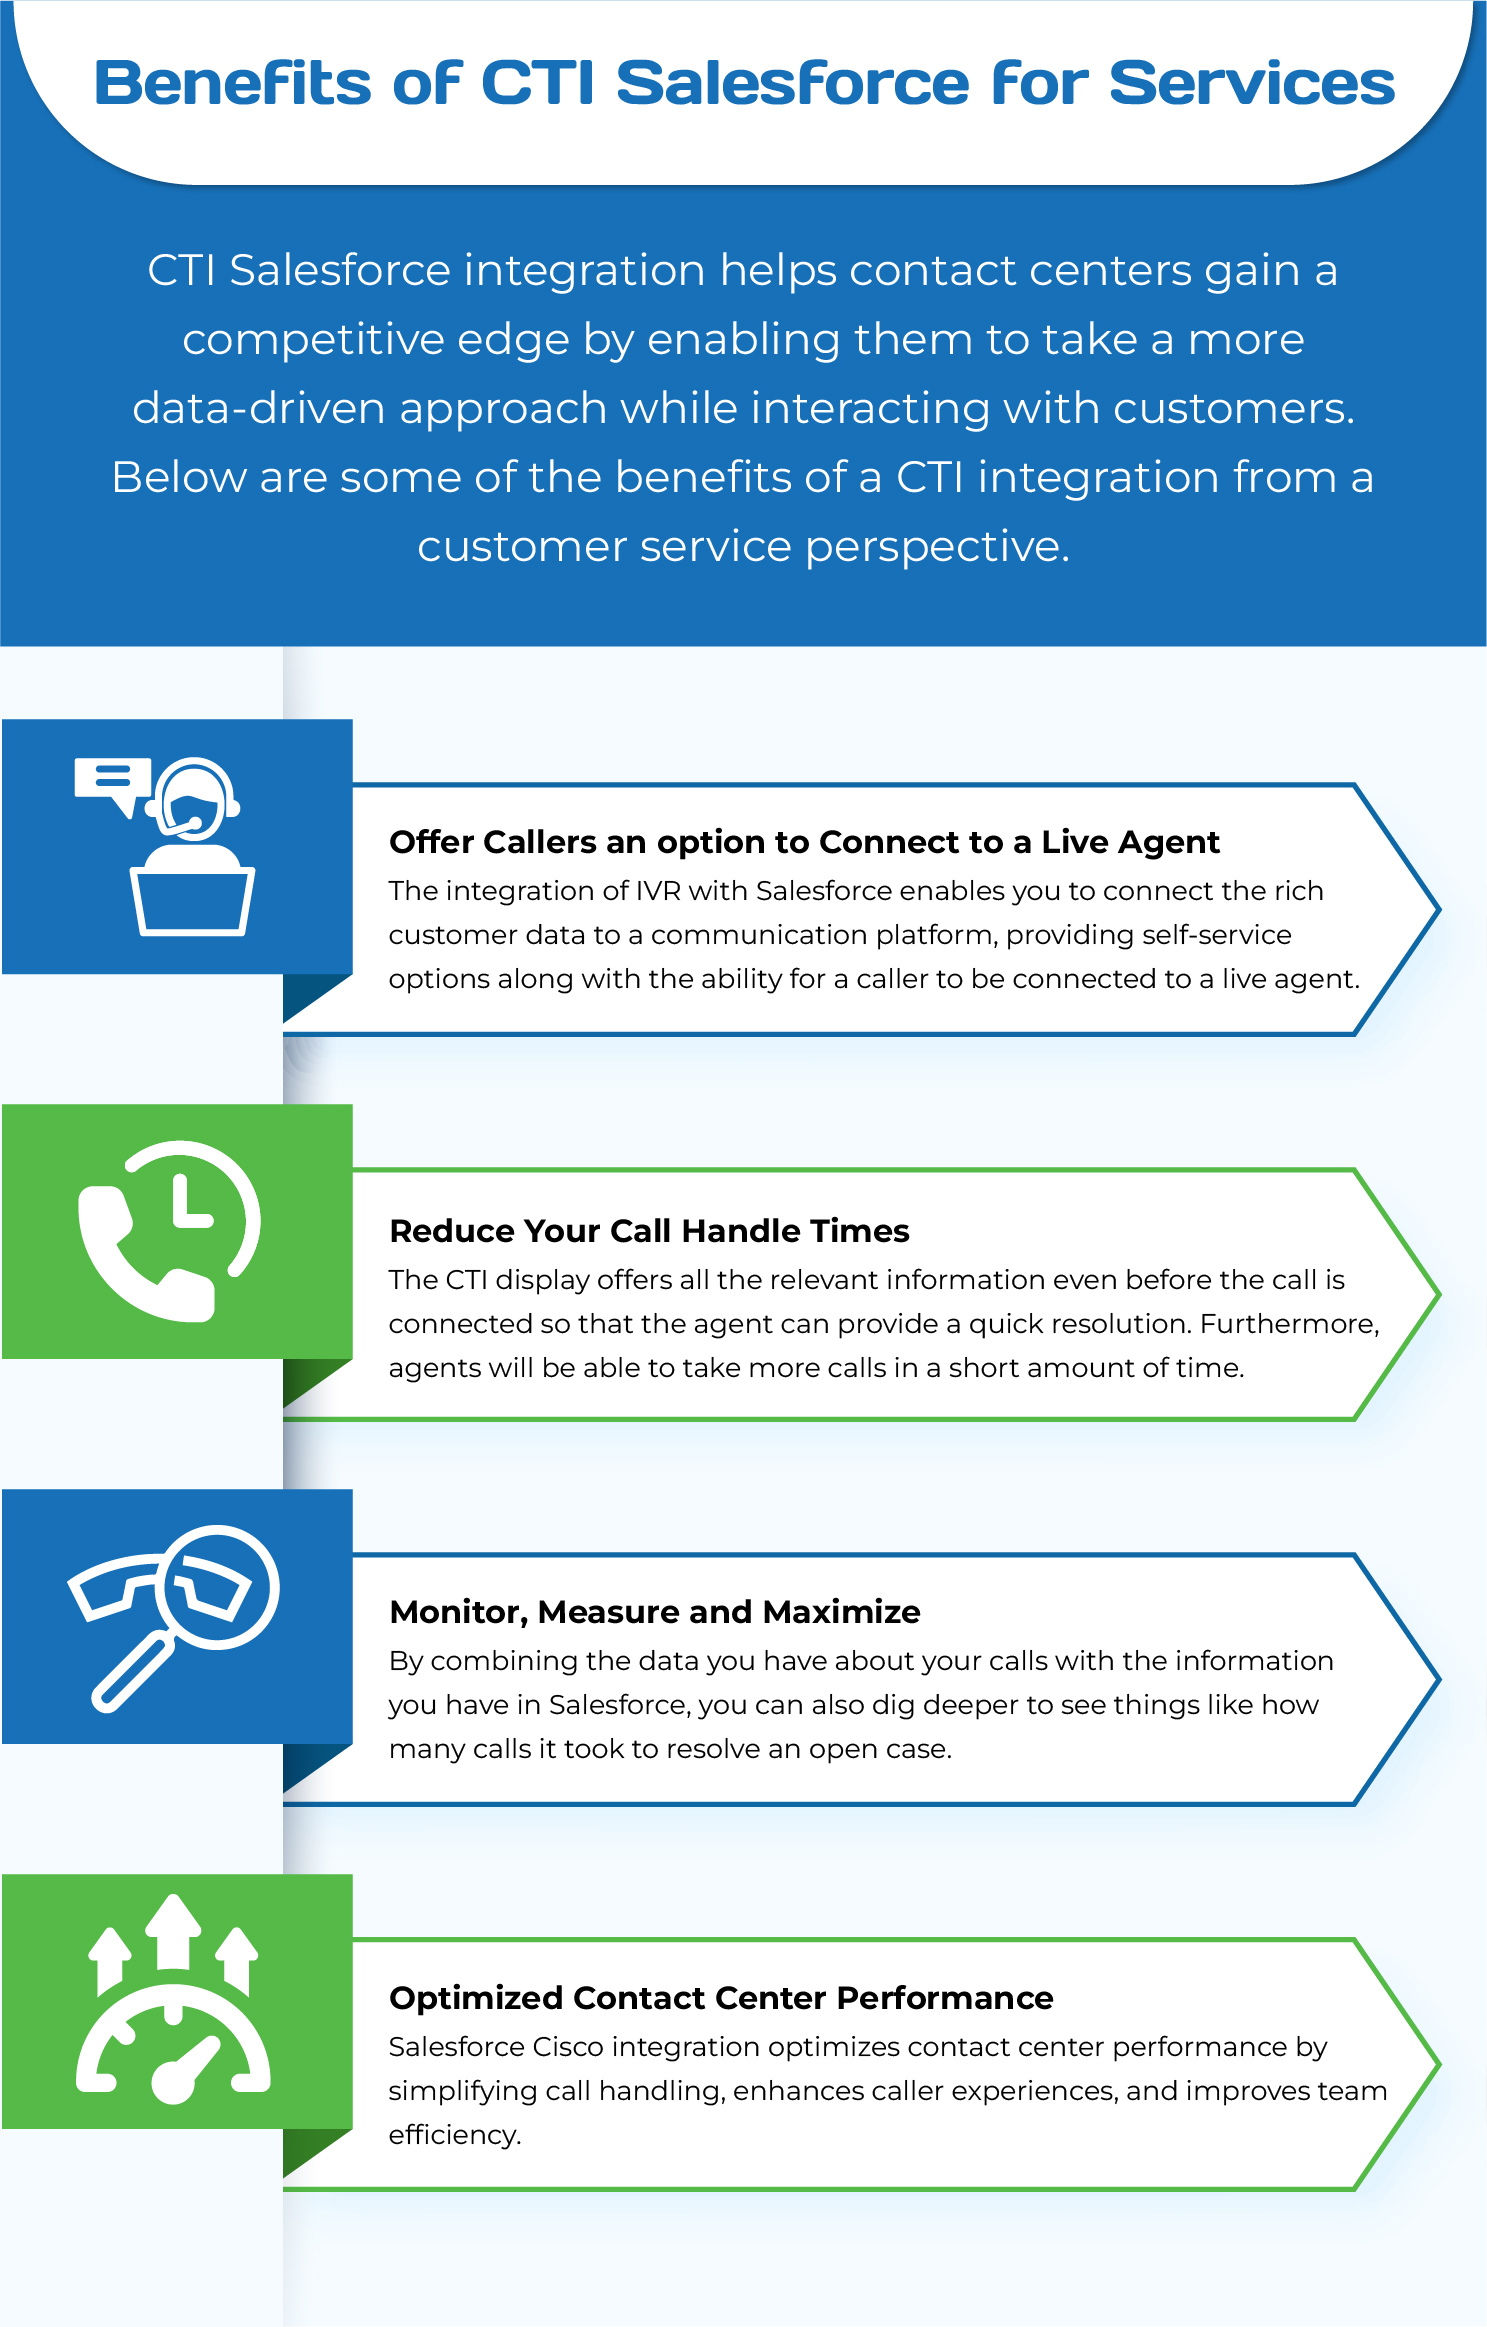 Benefits of CTI Salesforce for Services